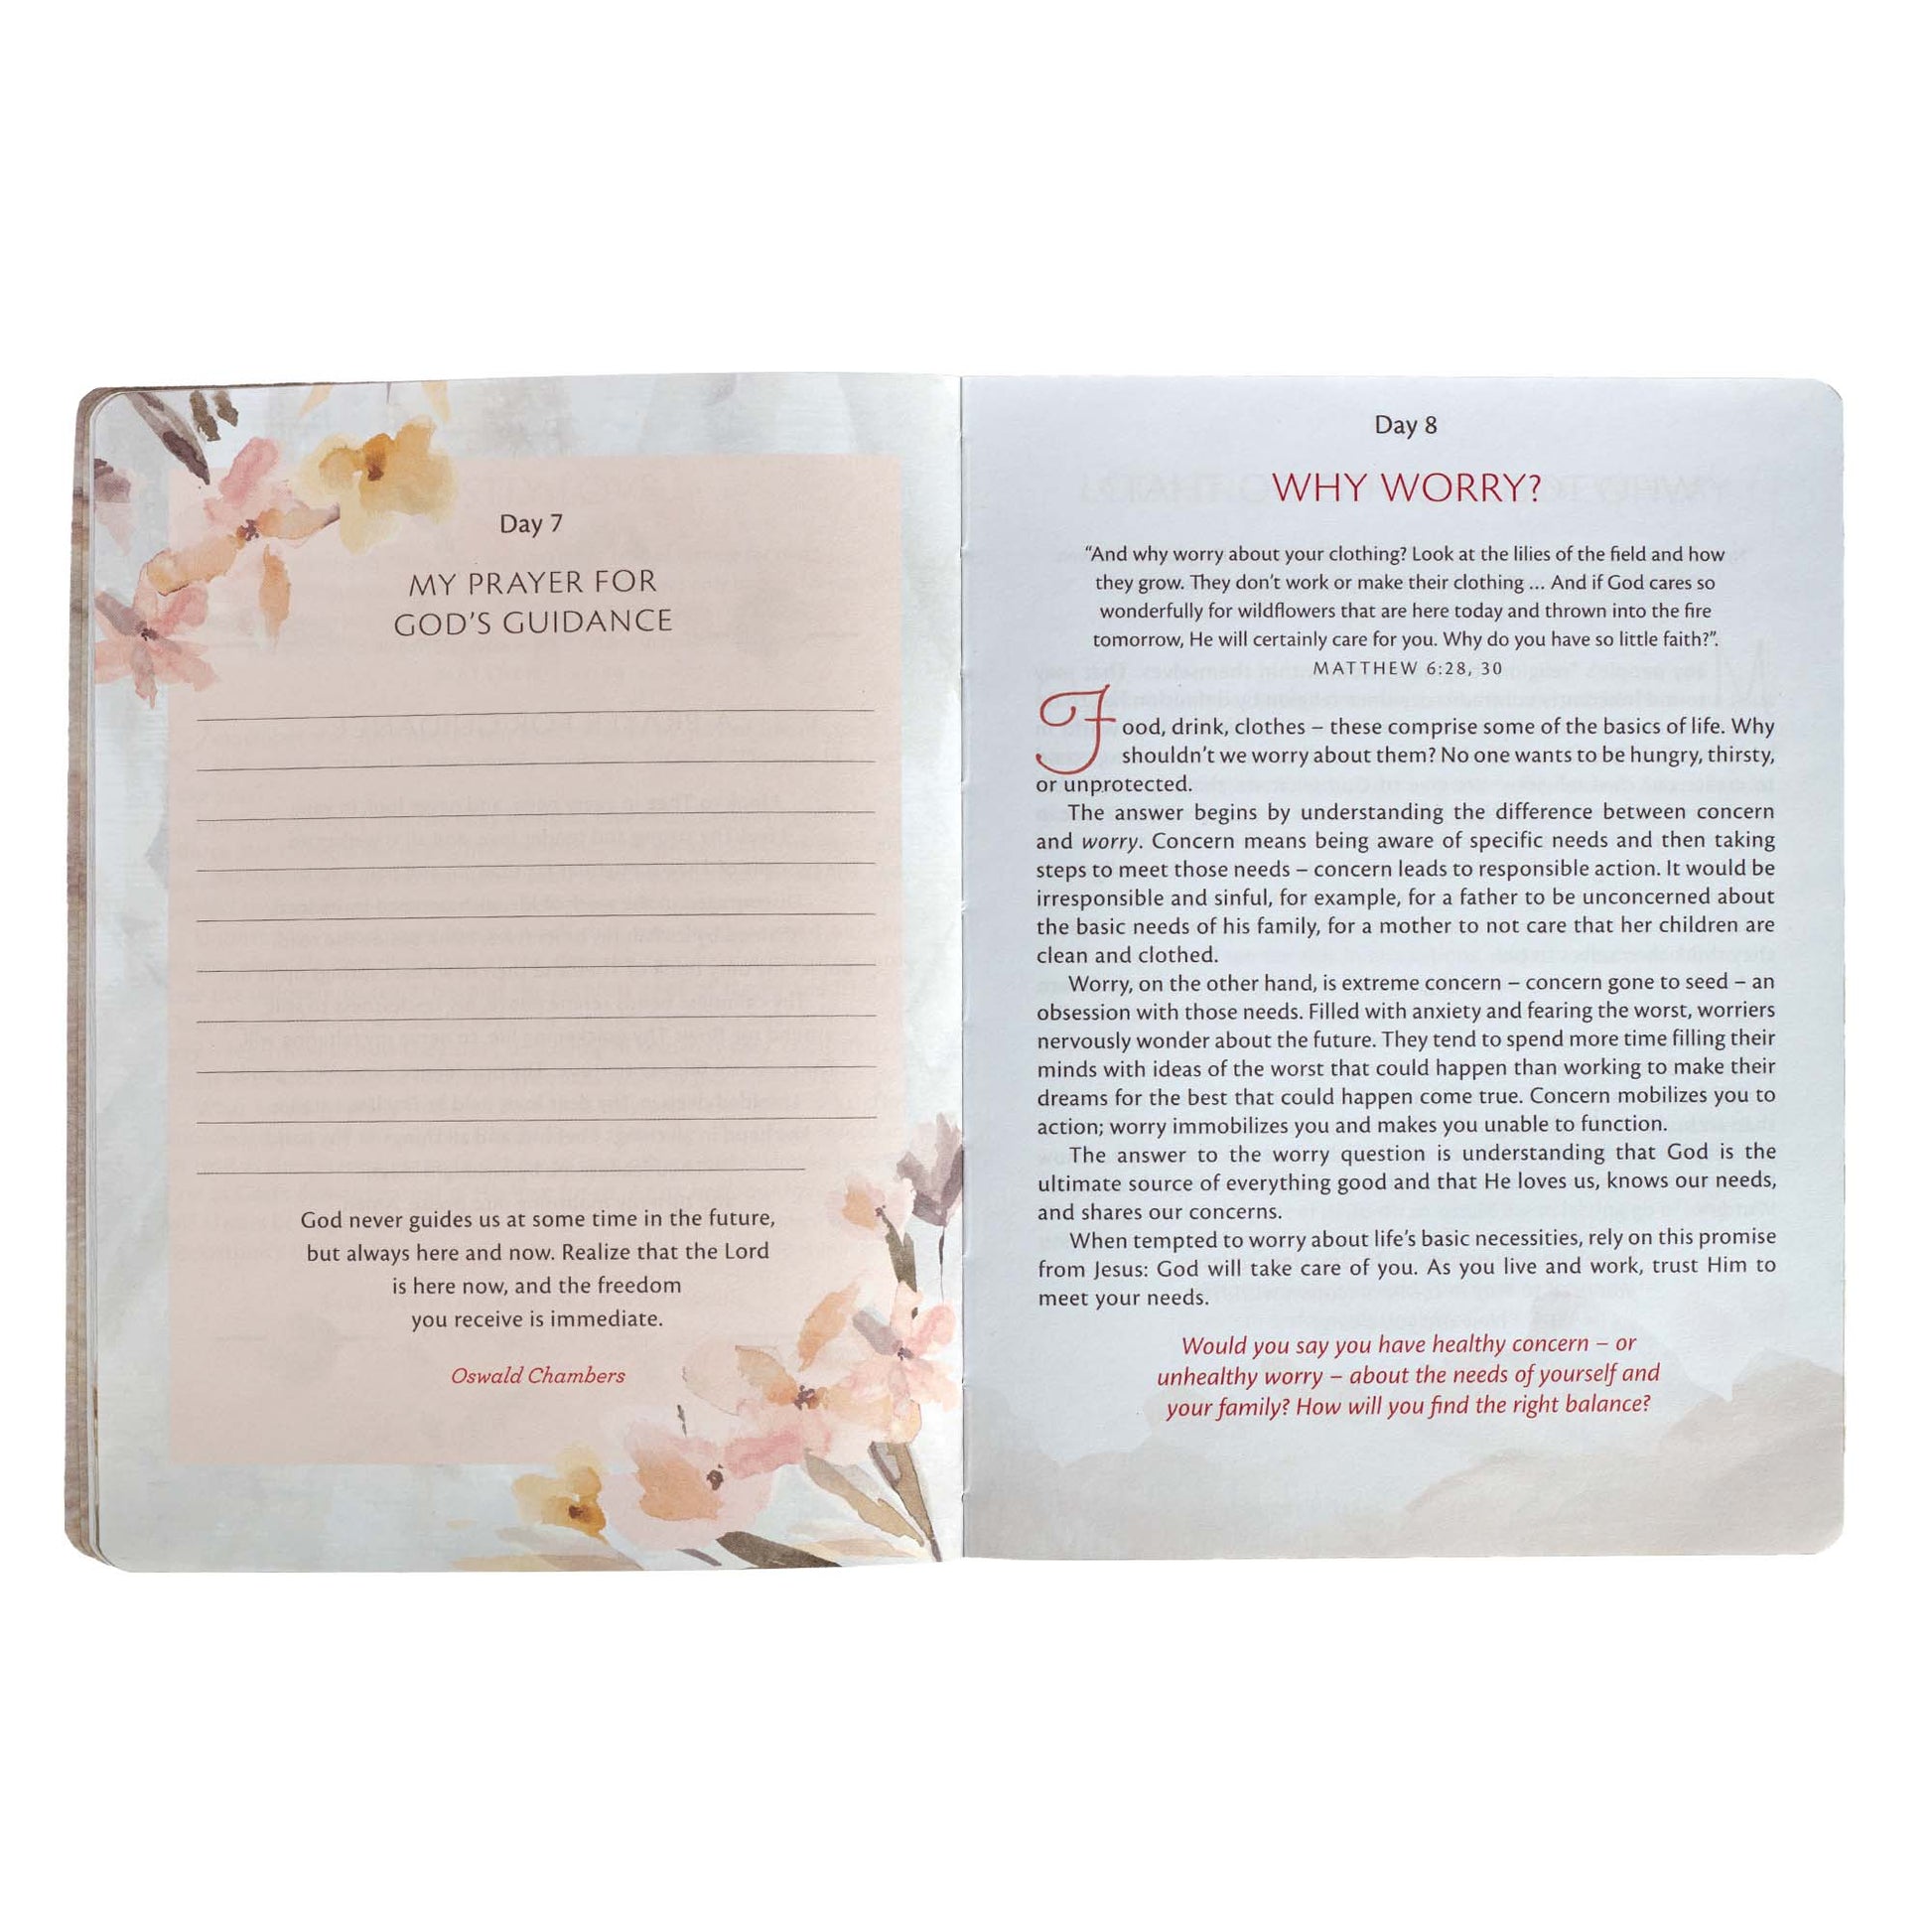 My Quiet Time Devotional Softcover Edition - The Christian Gift Company